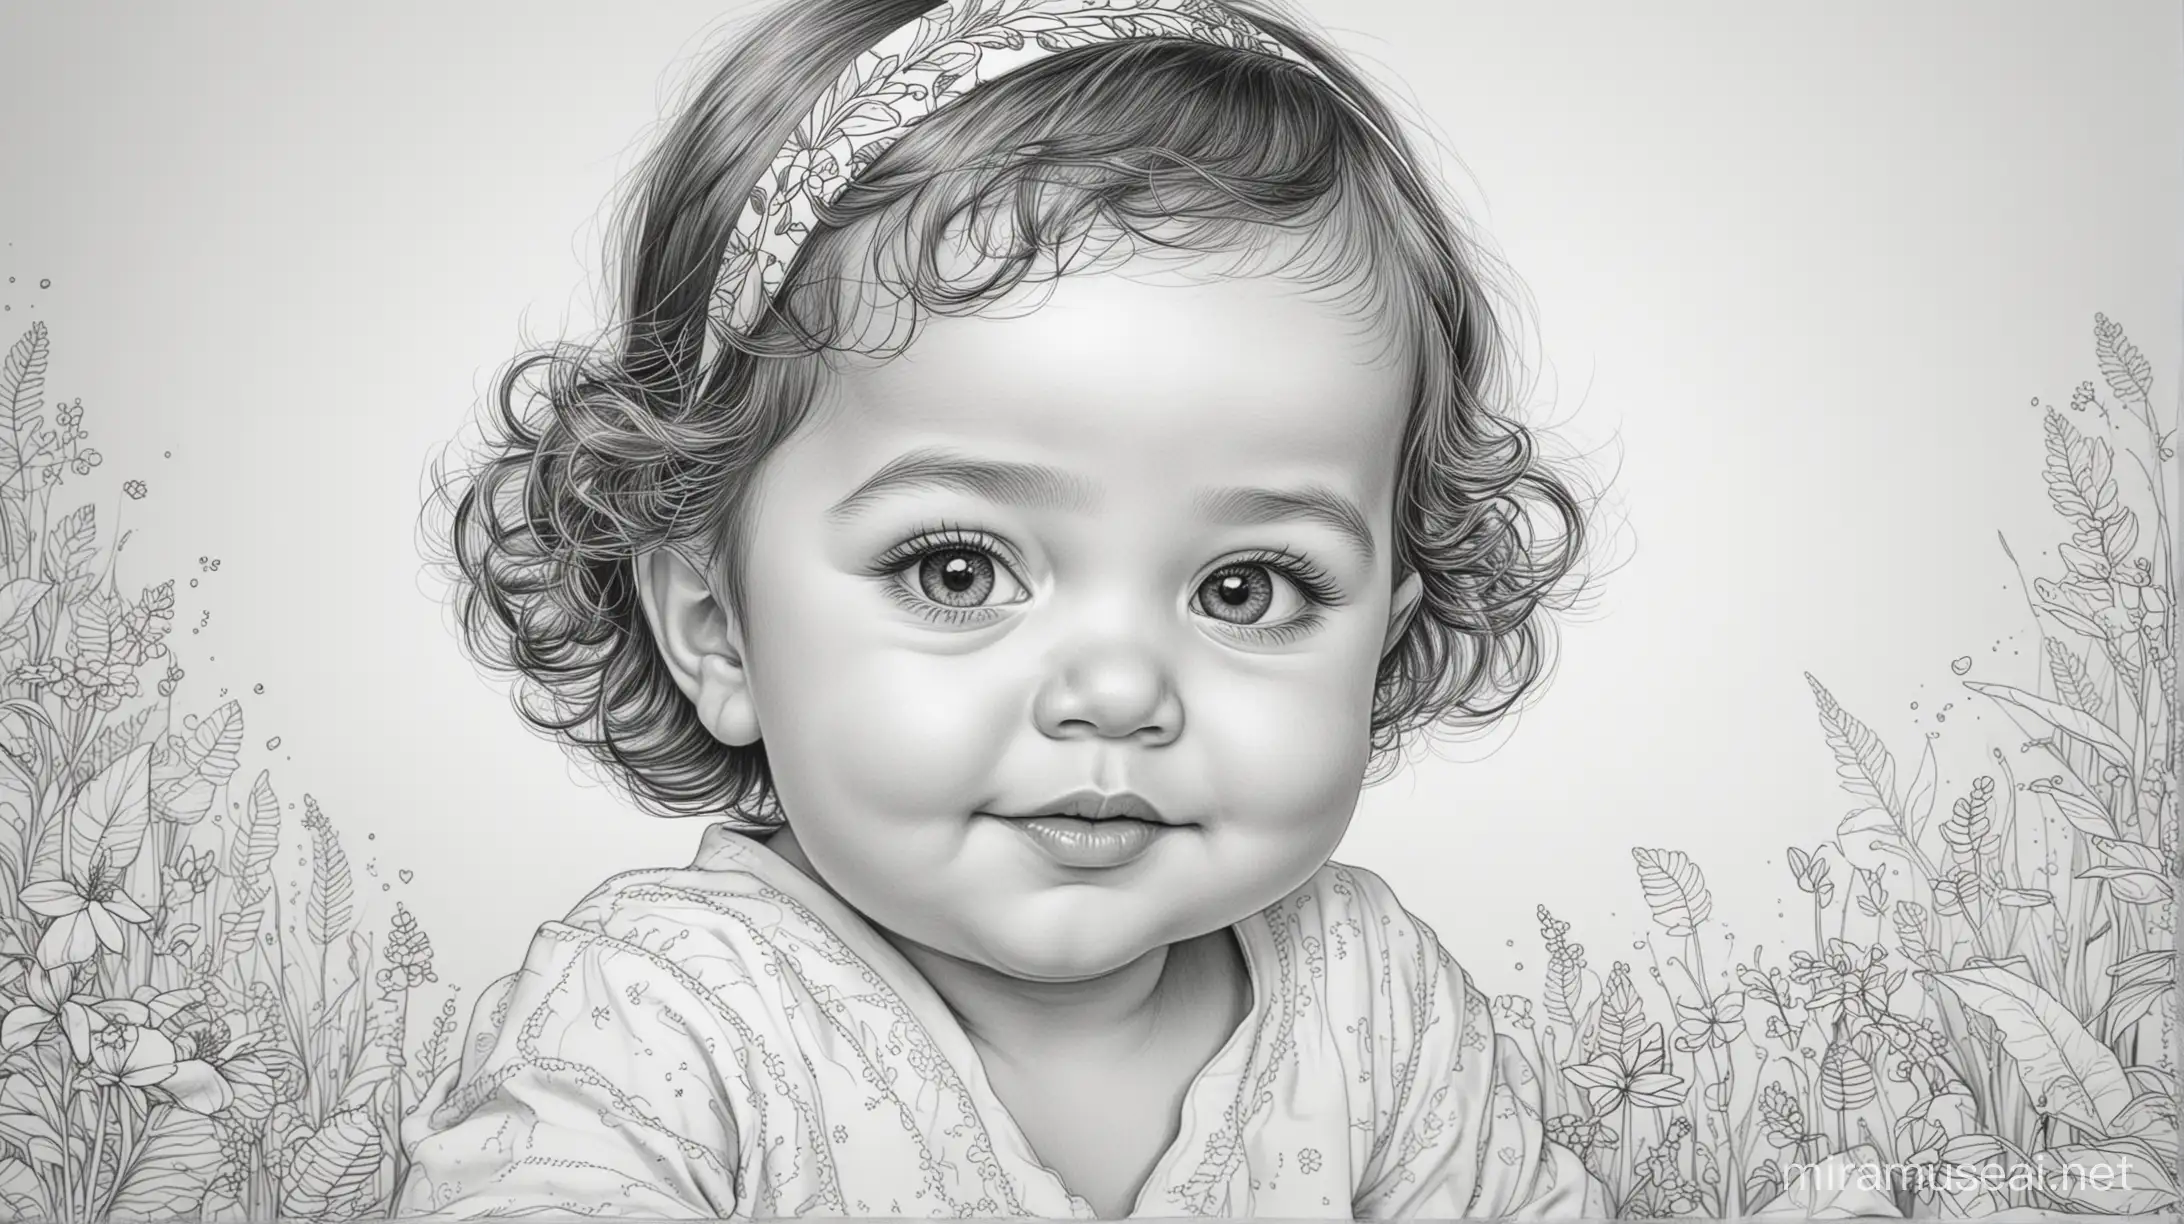 colouring page with a baby girl called Miriam, in black and white, cute and sweet